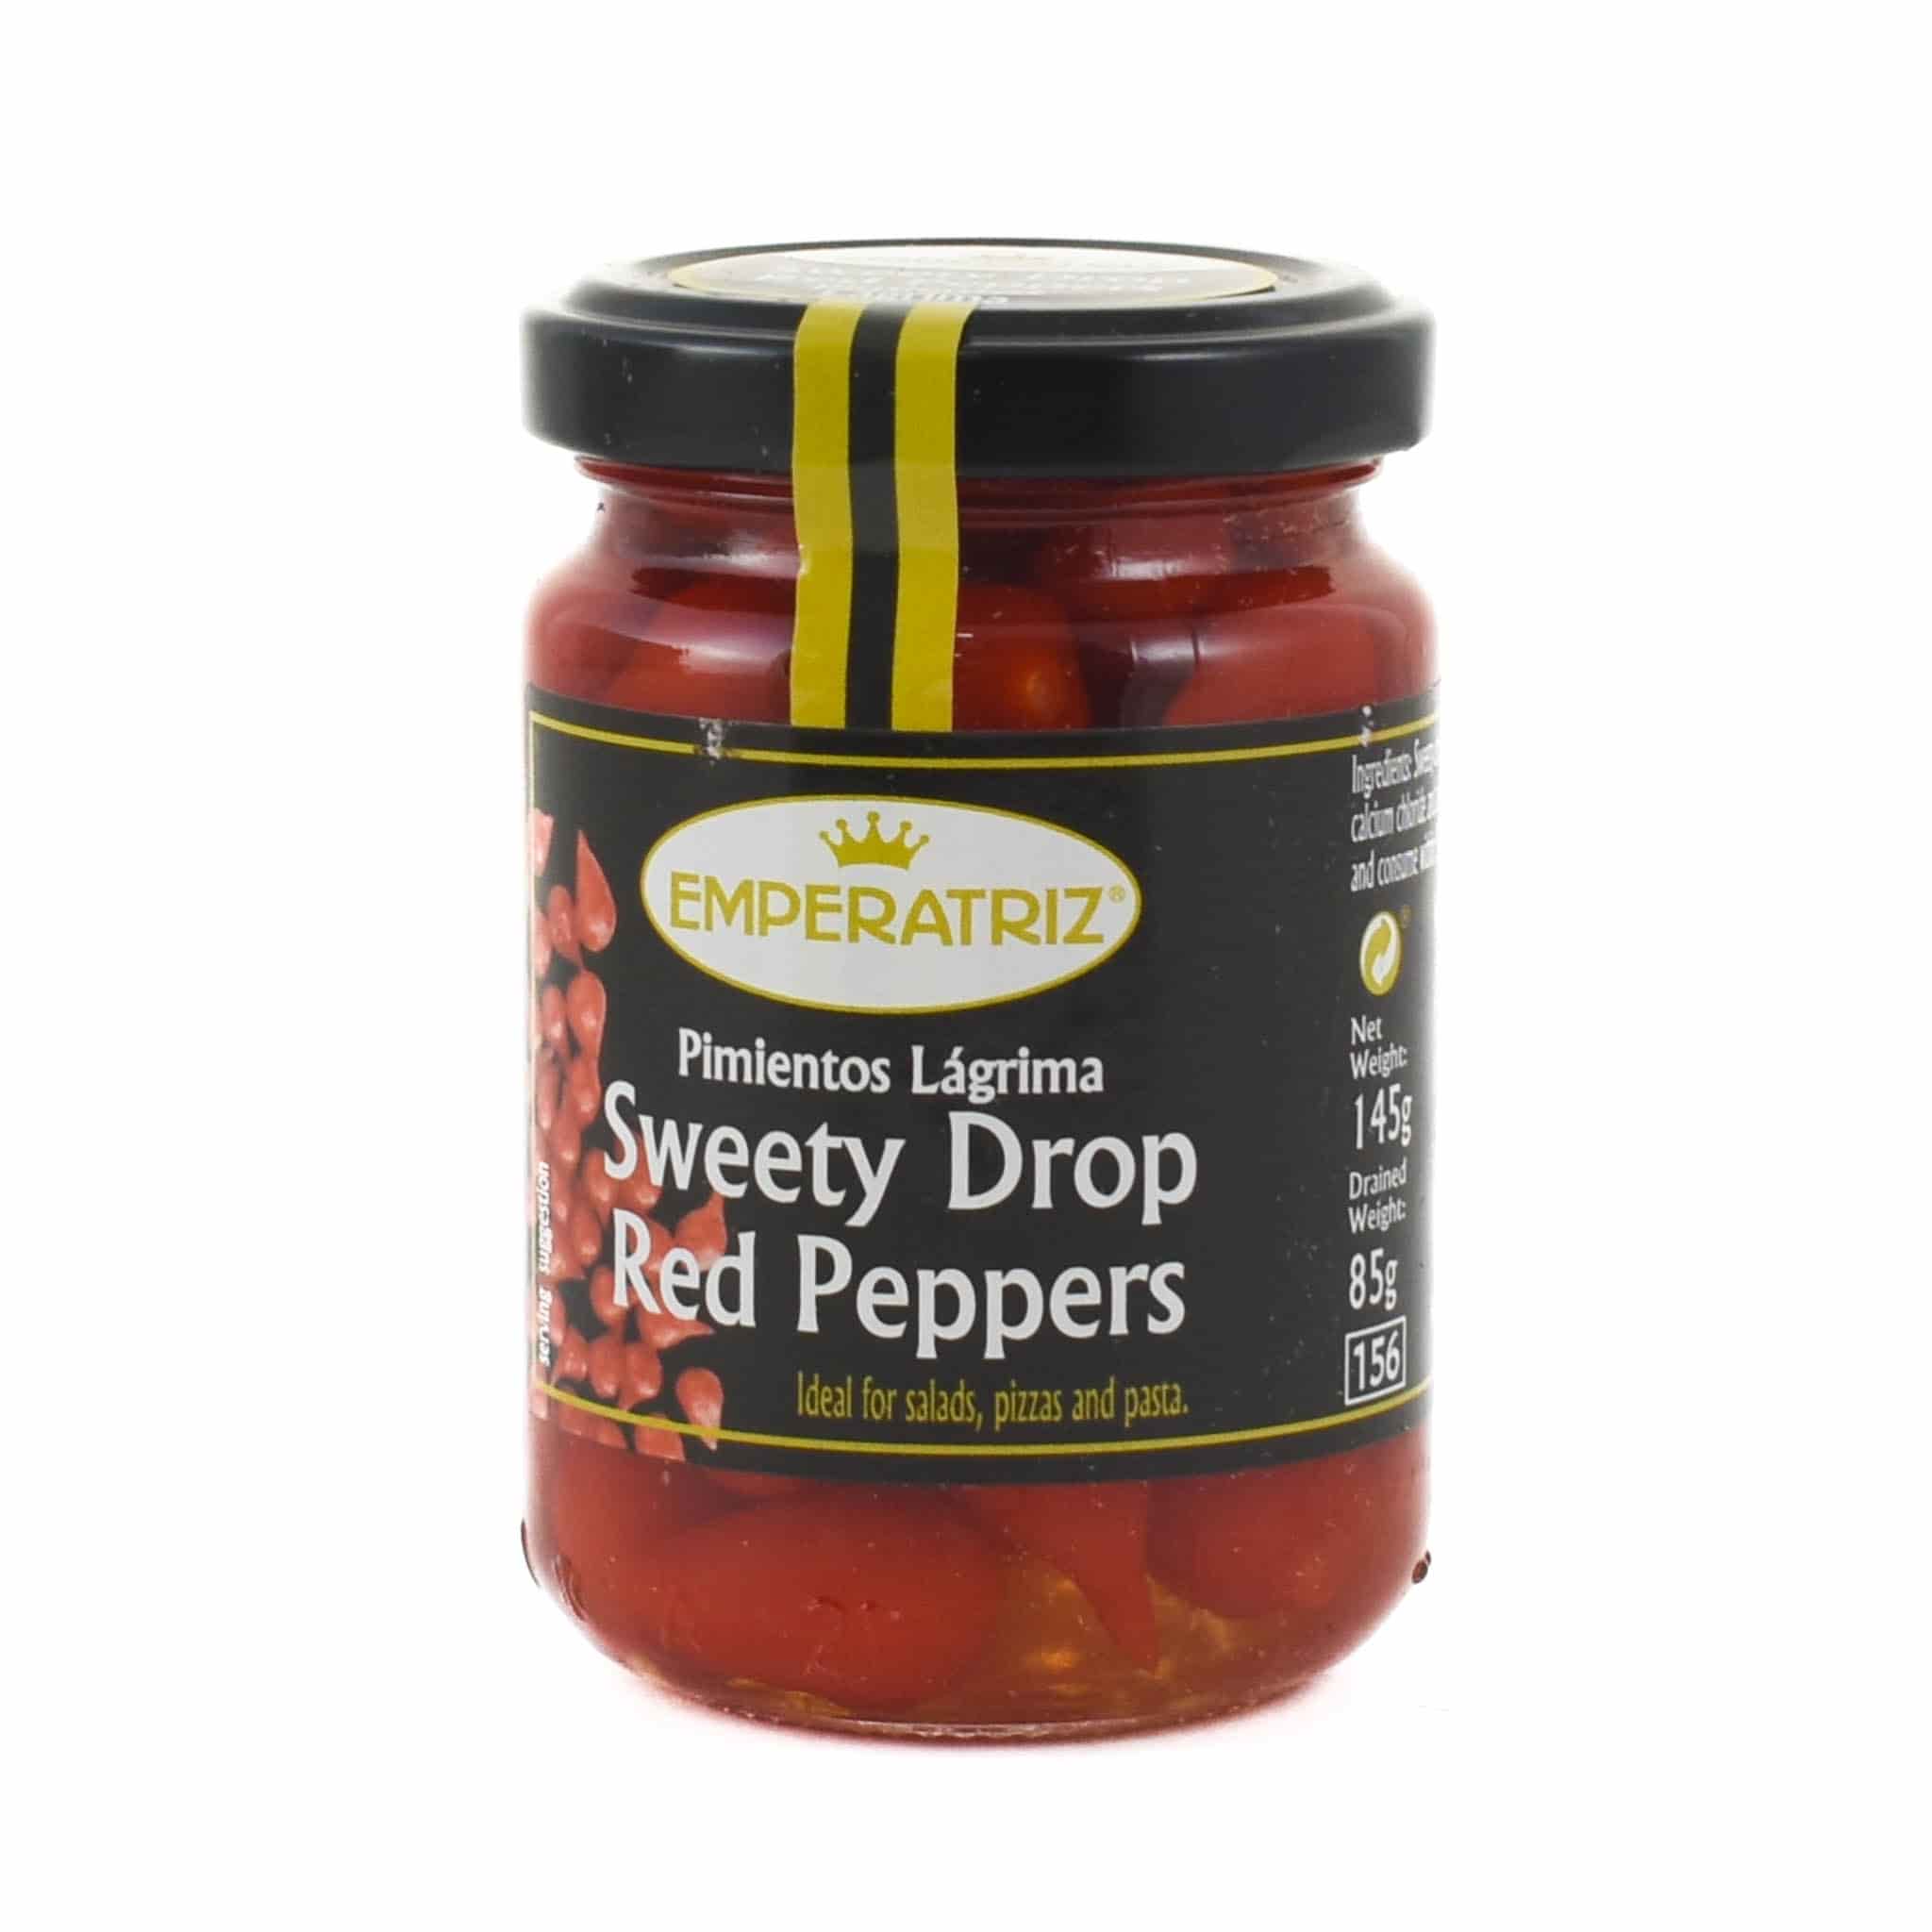 Pimientos Lagrima 'Sweety Drop' Peppers, 145g